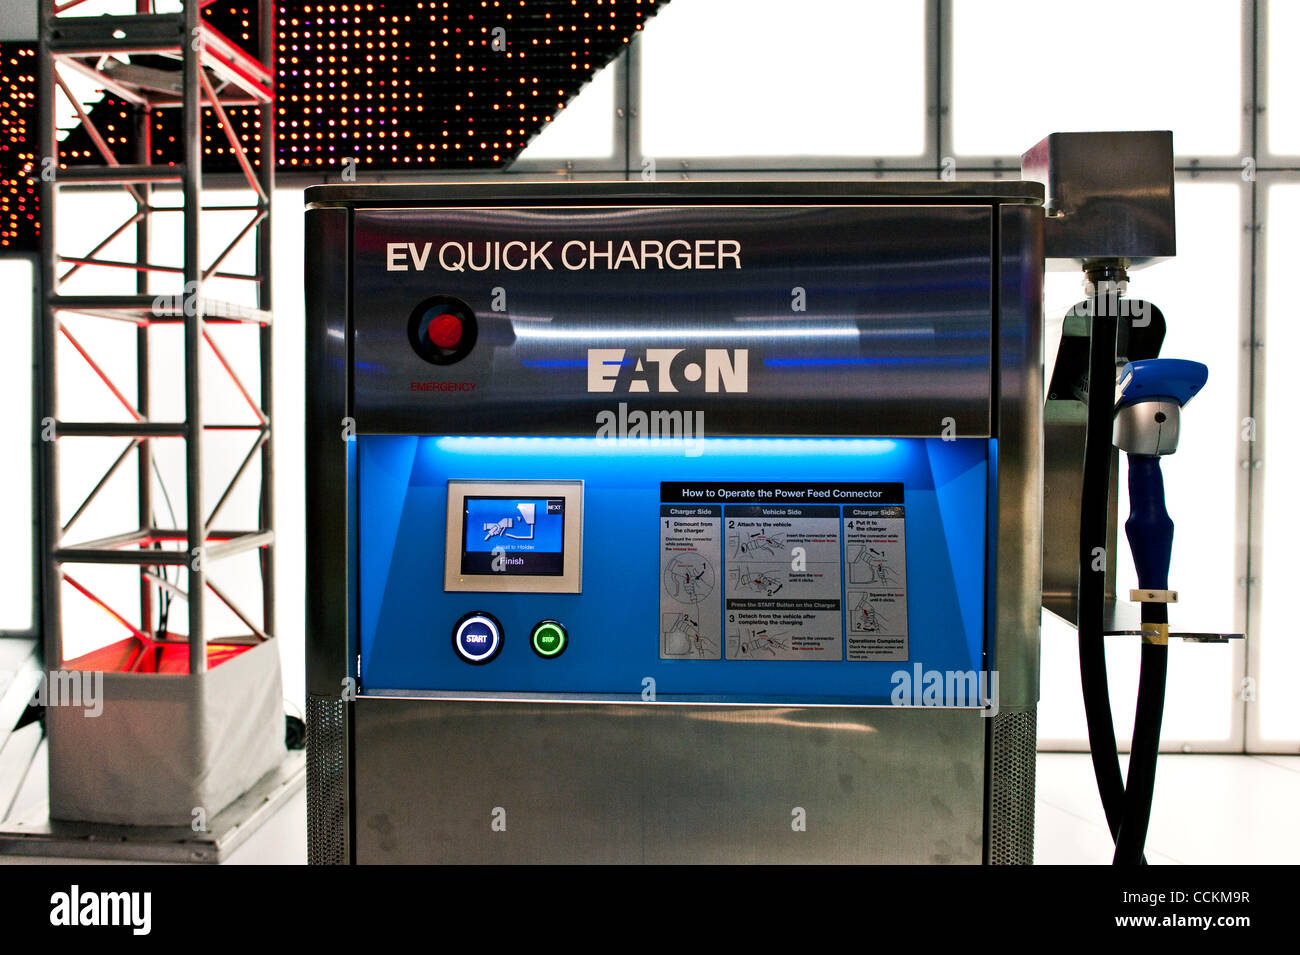 Nov. 17, 2010 - Los Angeles, California, USA -  A battery charging station from the Eaton Corporation on display at the 2010 LA Auto Show. Stock Photo